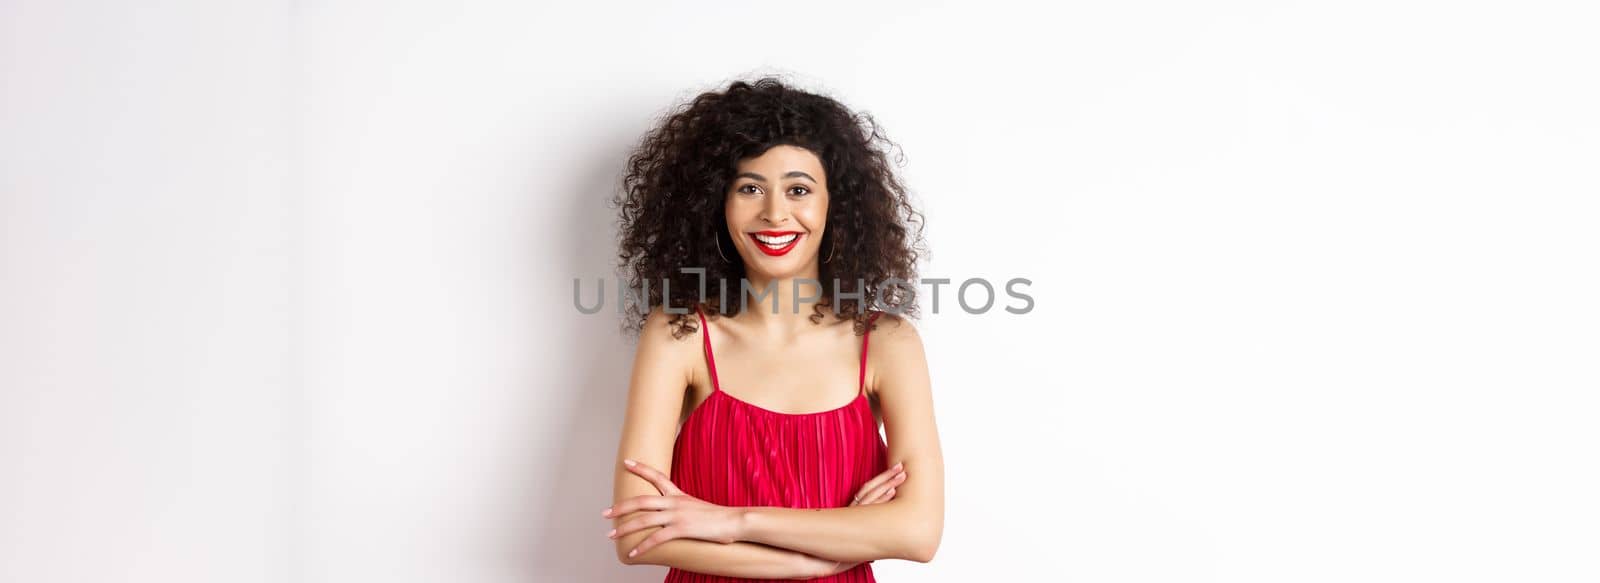 Elegant young woman in red dress with makeup, dressed-up for festive event, smiling happy at camera, standing over white background.